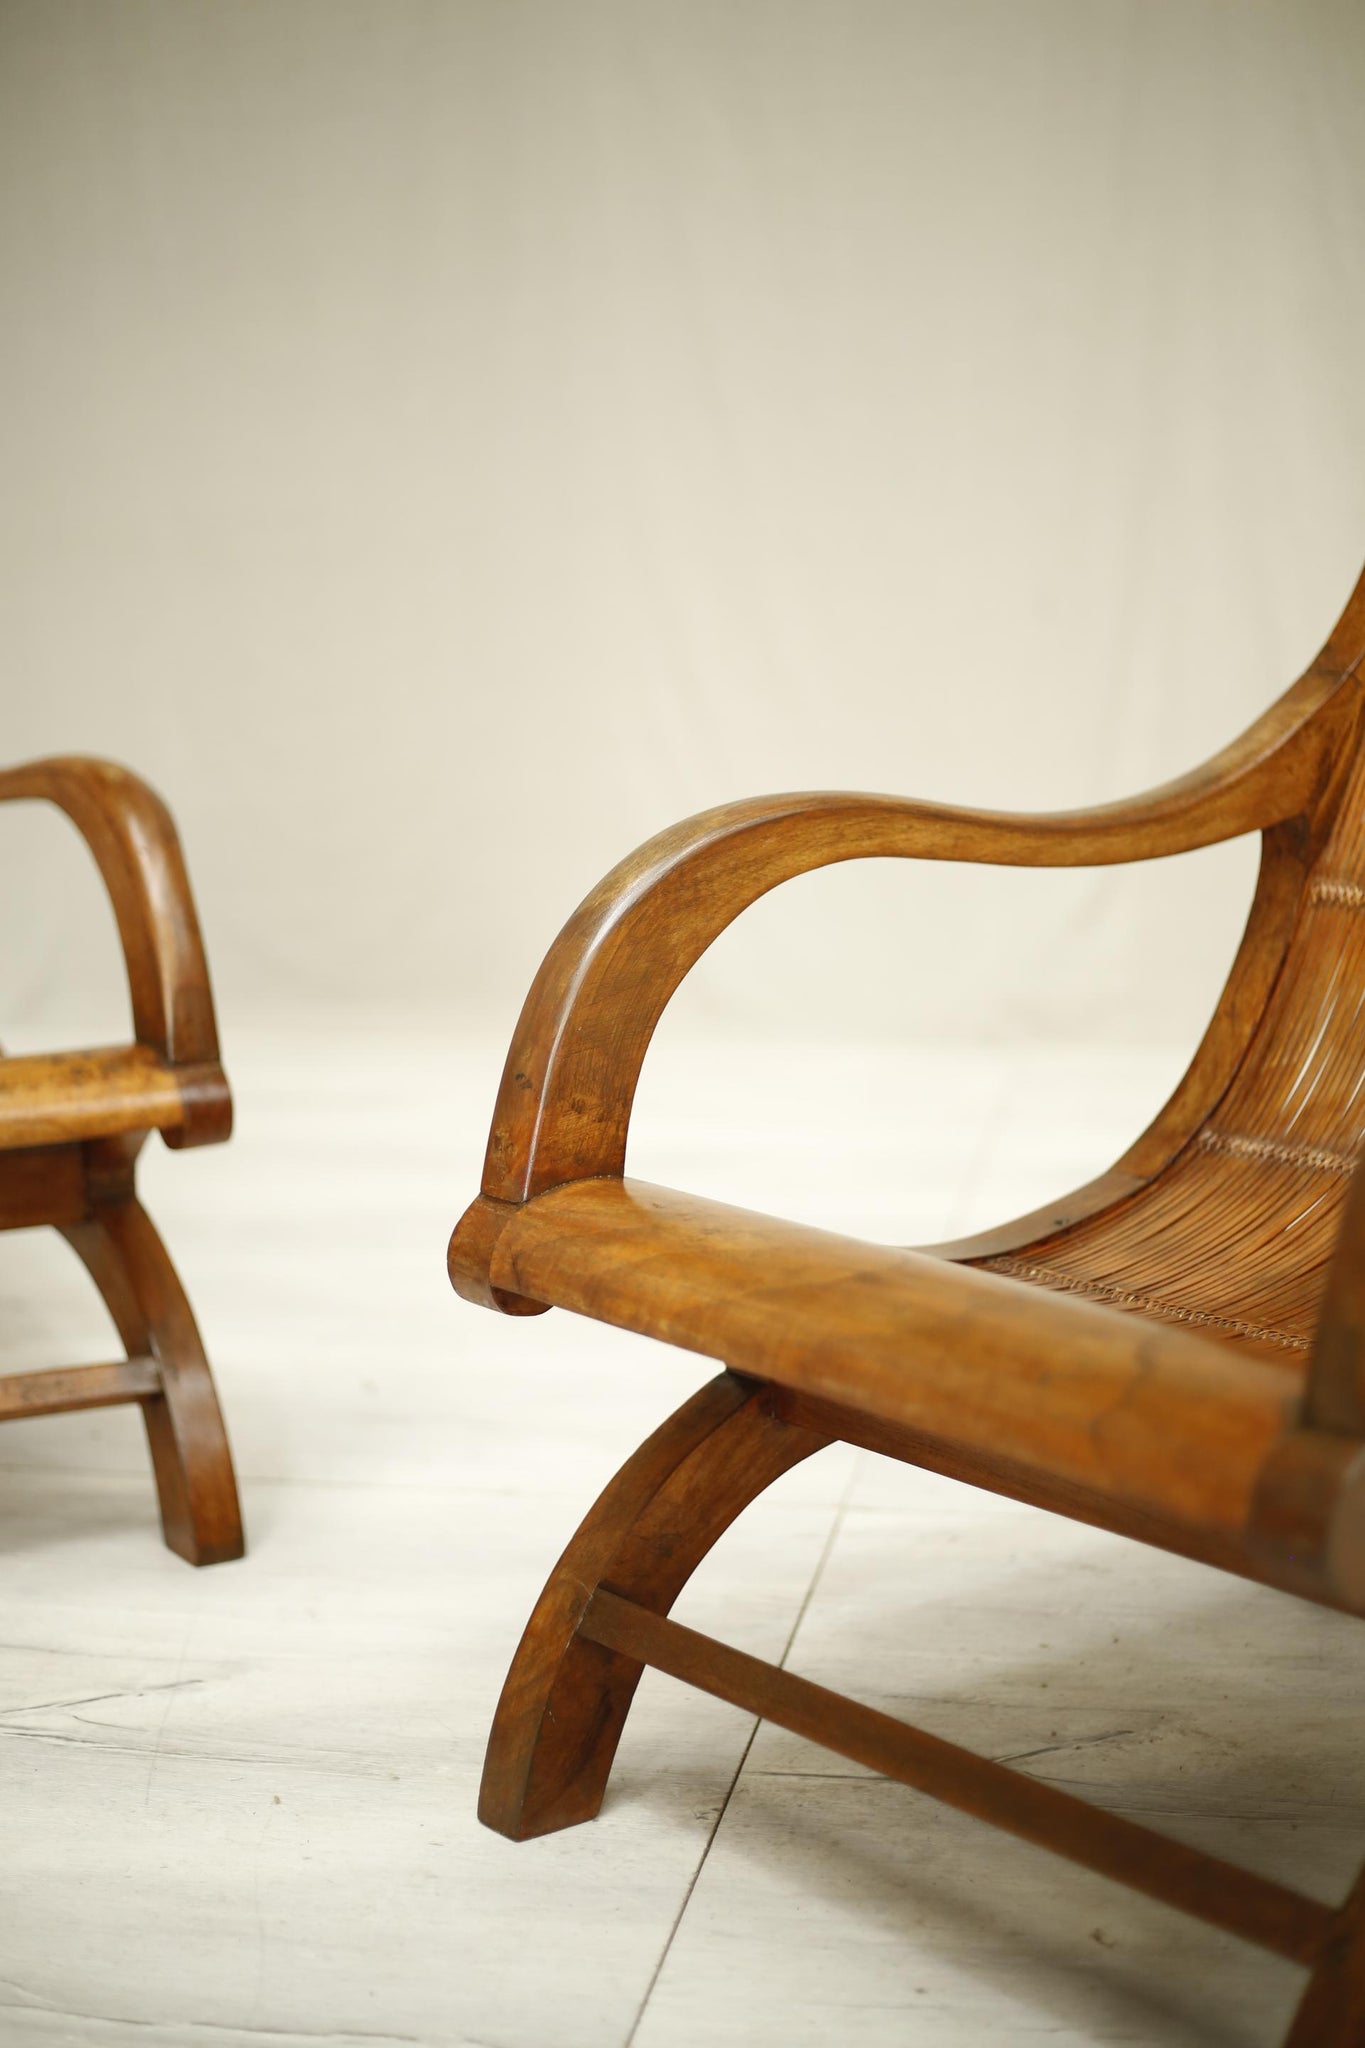 Pair of Antique 20th century Teak and slatted bamboo armchairs - TallBoy Interiors